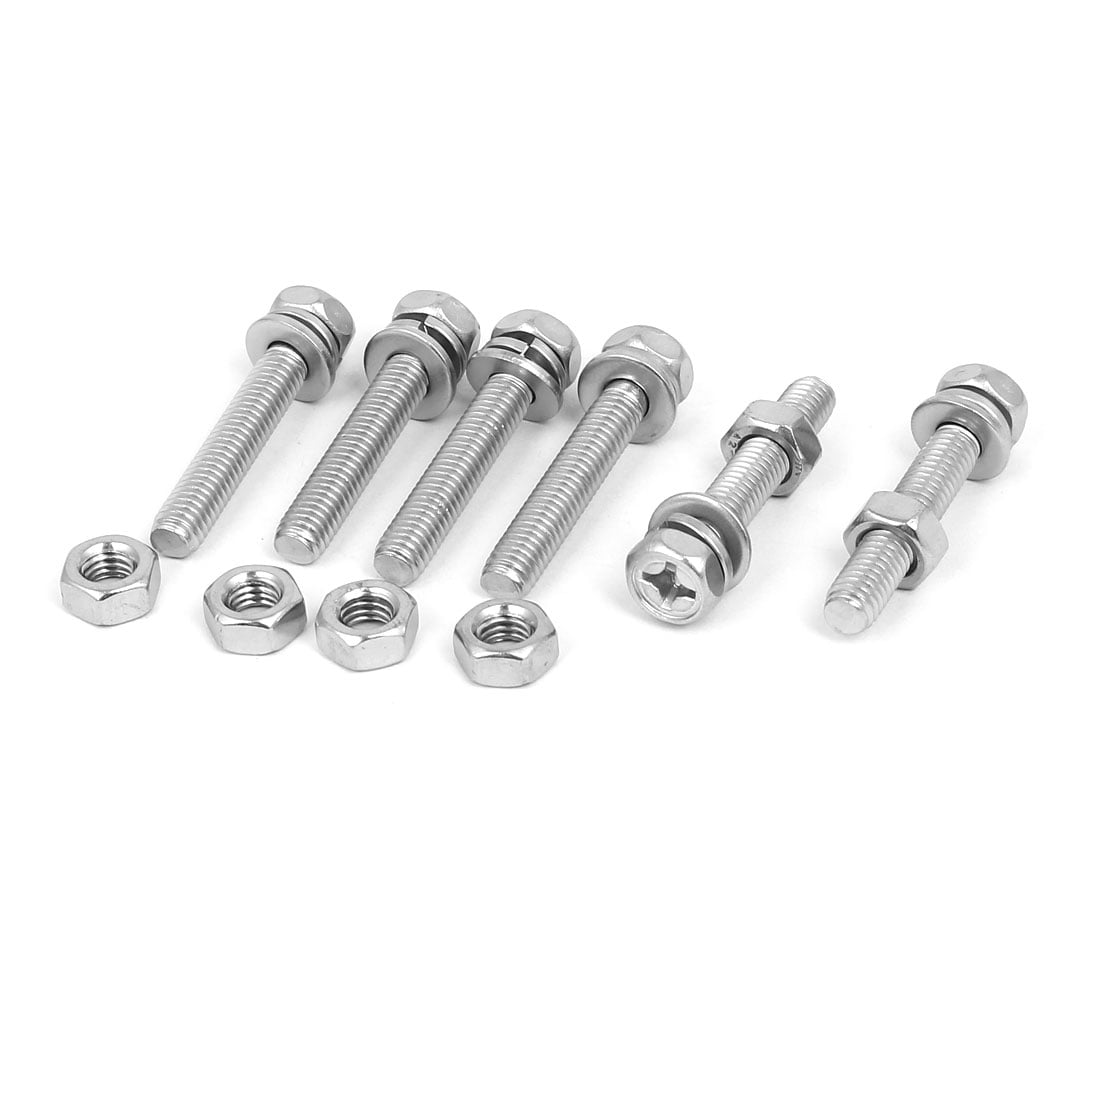 Assorted Kit Nuts Bolts And Washers Setscrews M6 8.8 High Tensile 580pcs 